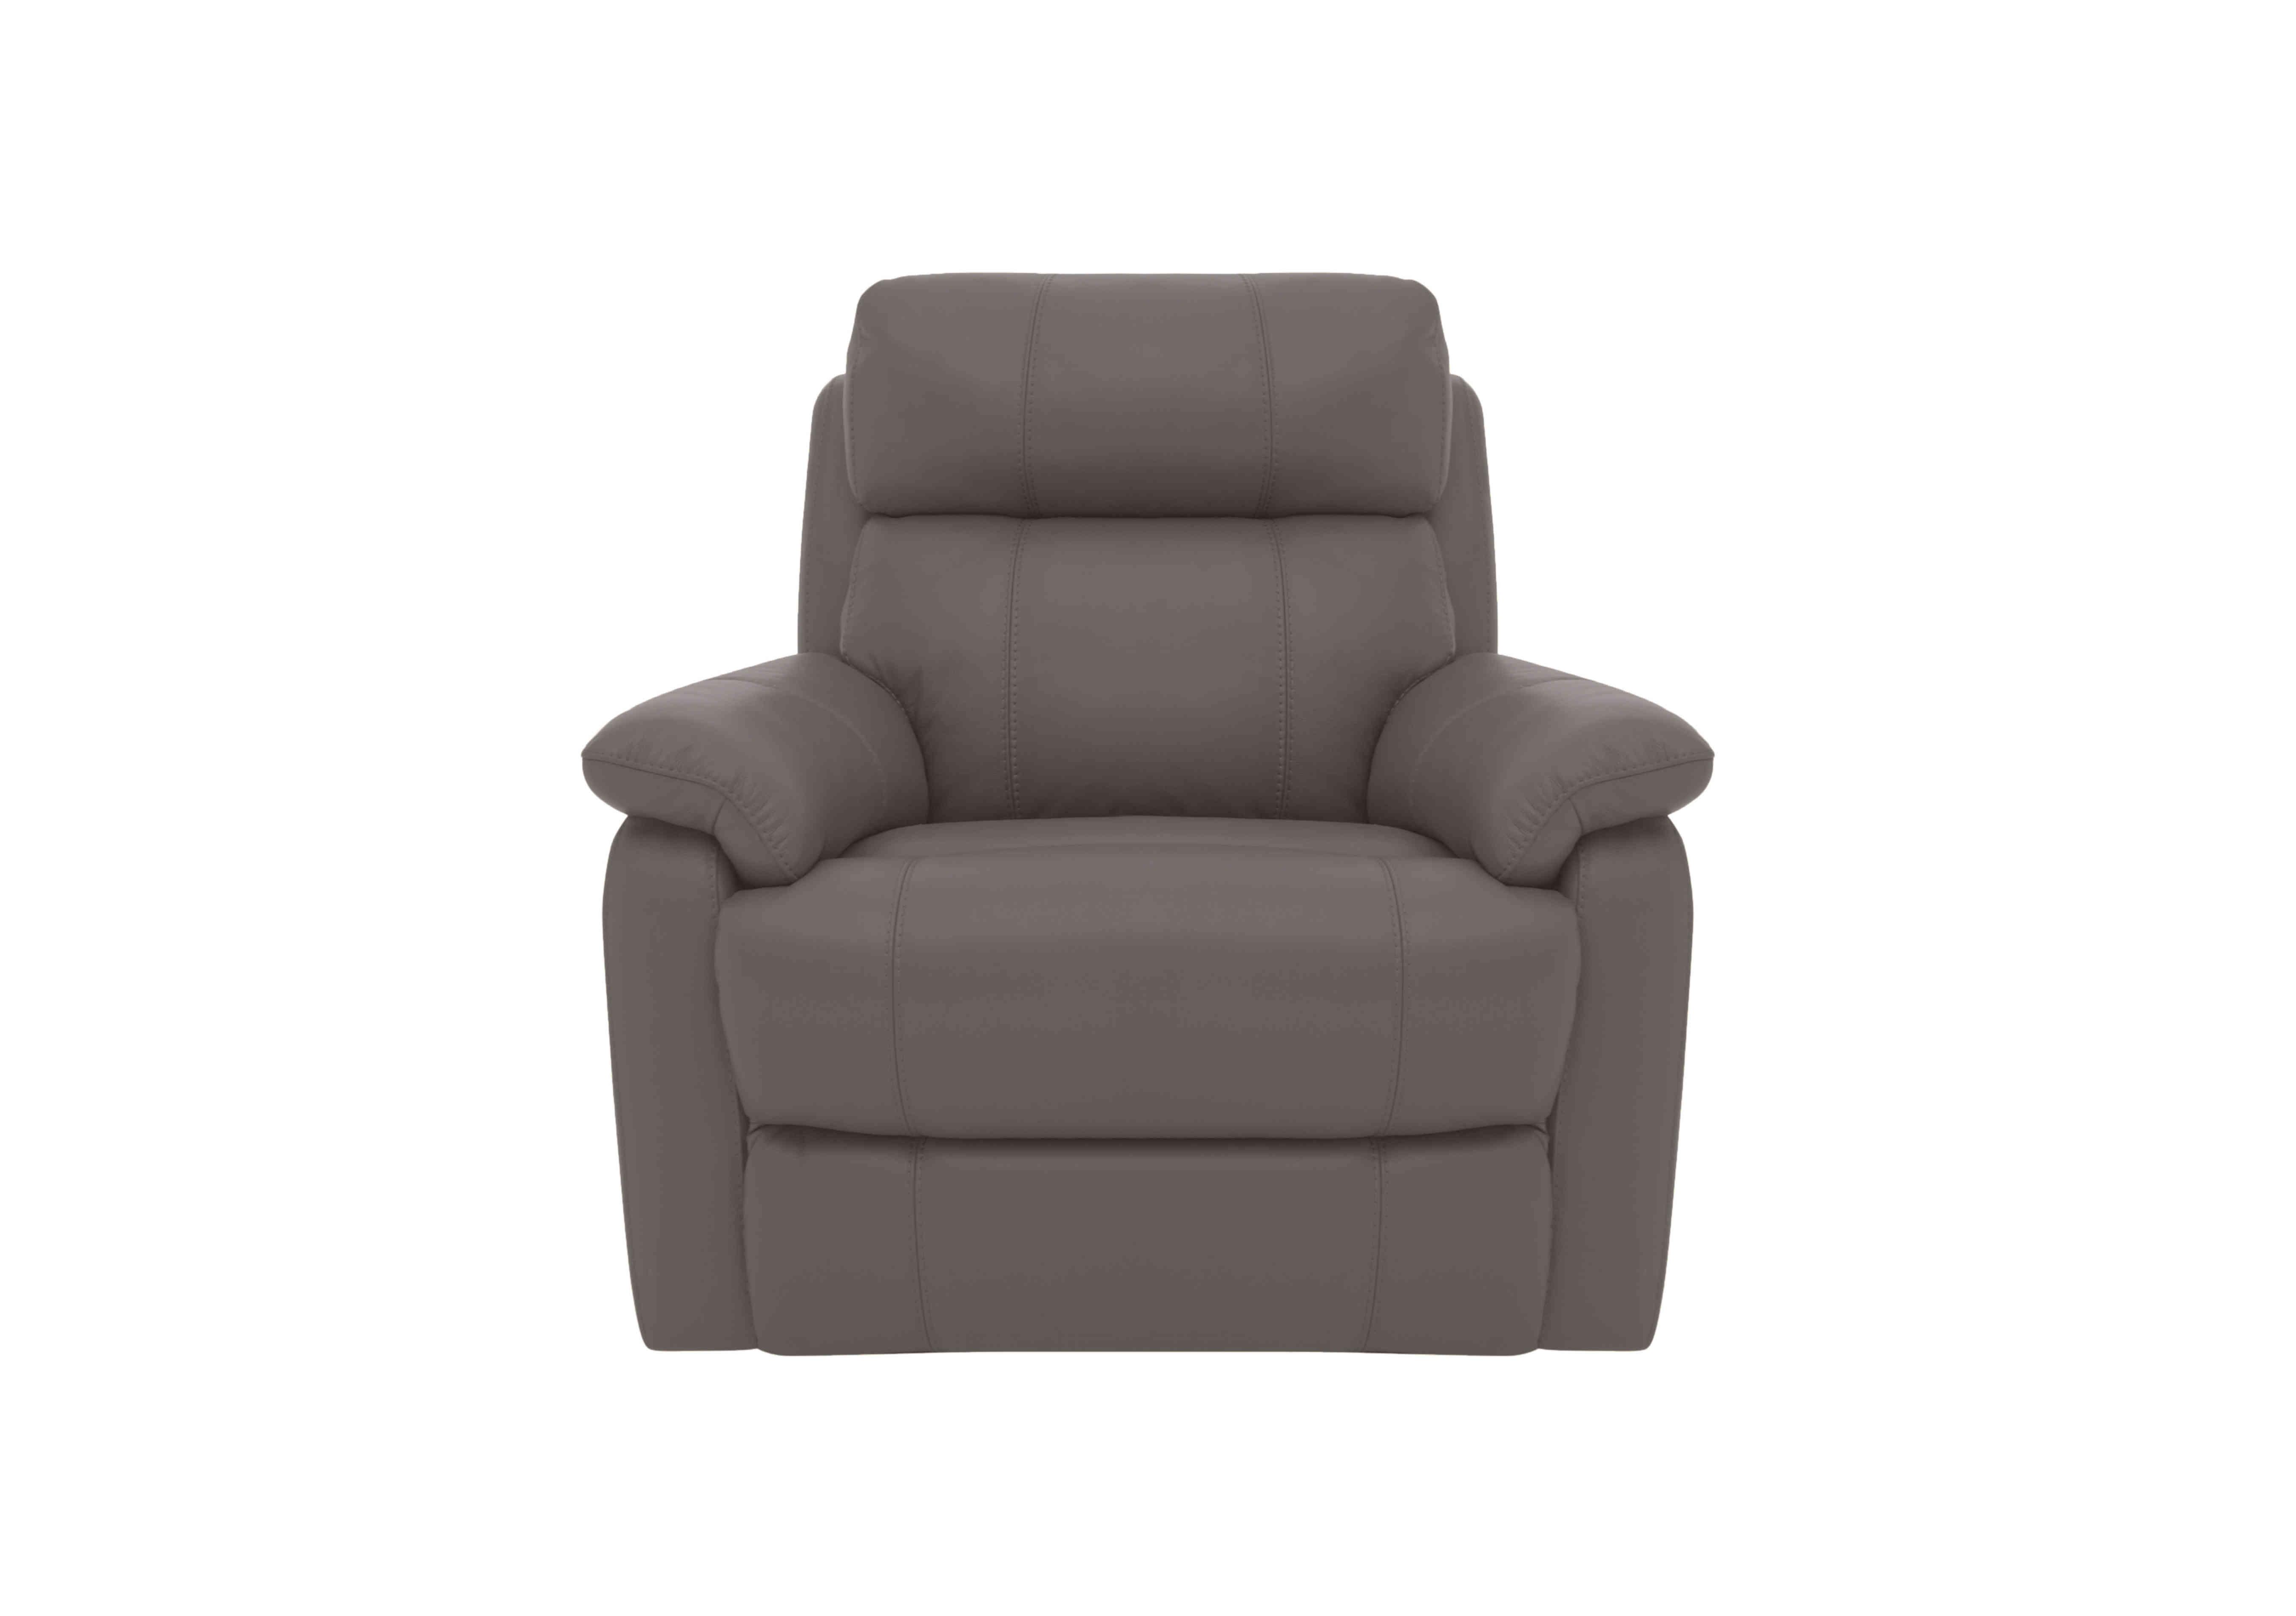 Relax Station Komodo Leather Power Armchair in Nc-042e Elephant on Furniture Village